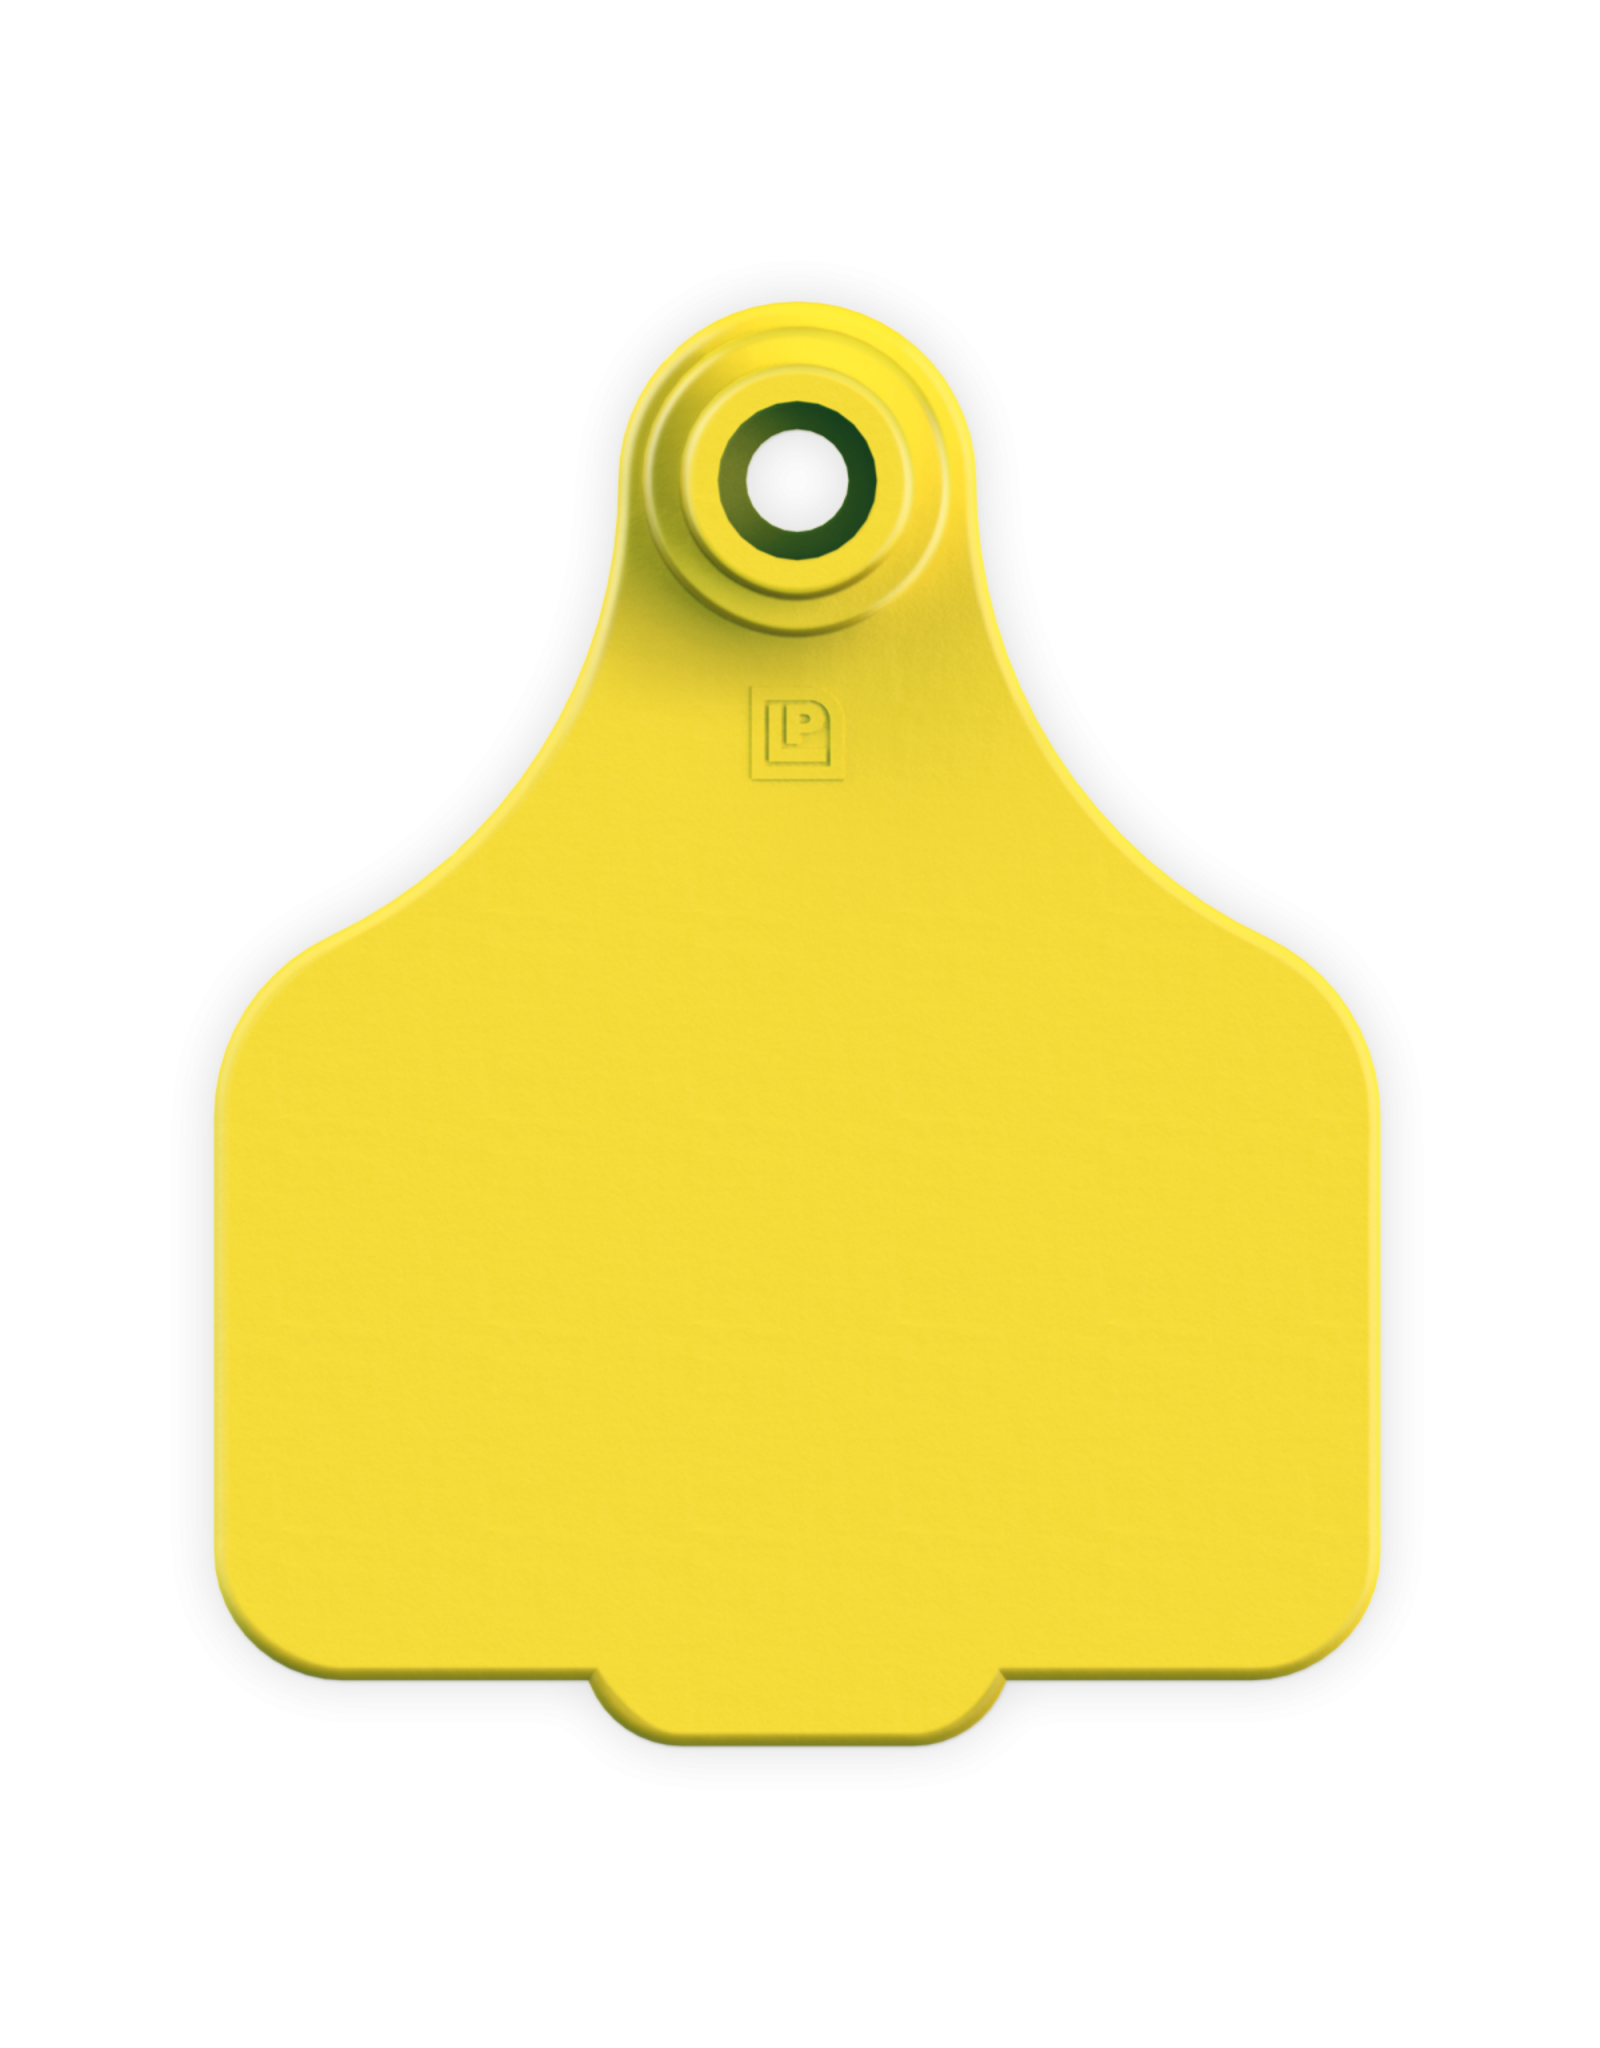 Leader TAG* LEADER 2 PC LARGE TAGS 25's - Yellow 2PL7- 58.20 (w) x 72.50 (h) x 12.80 (d) mm